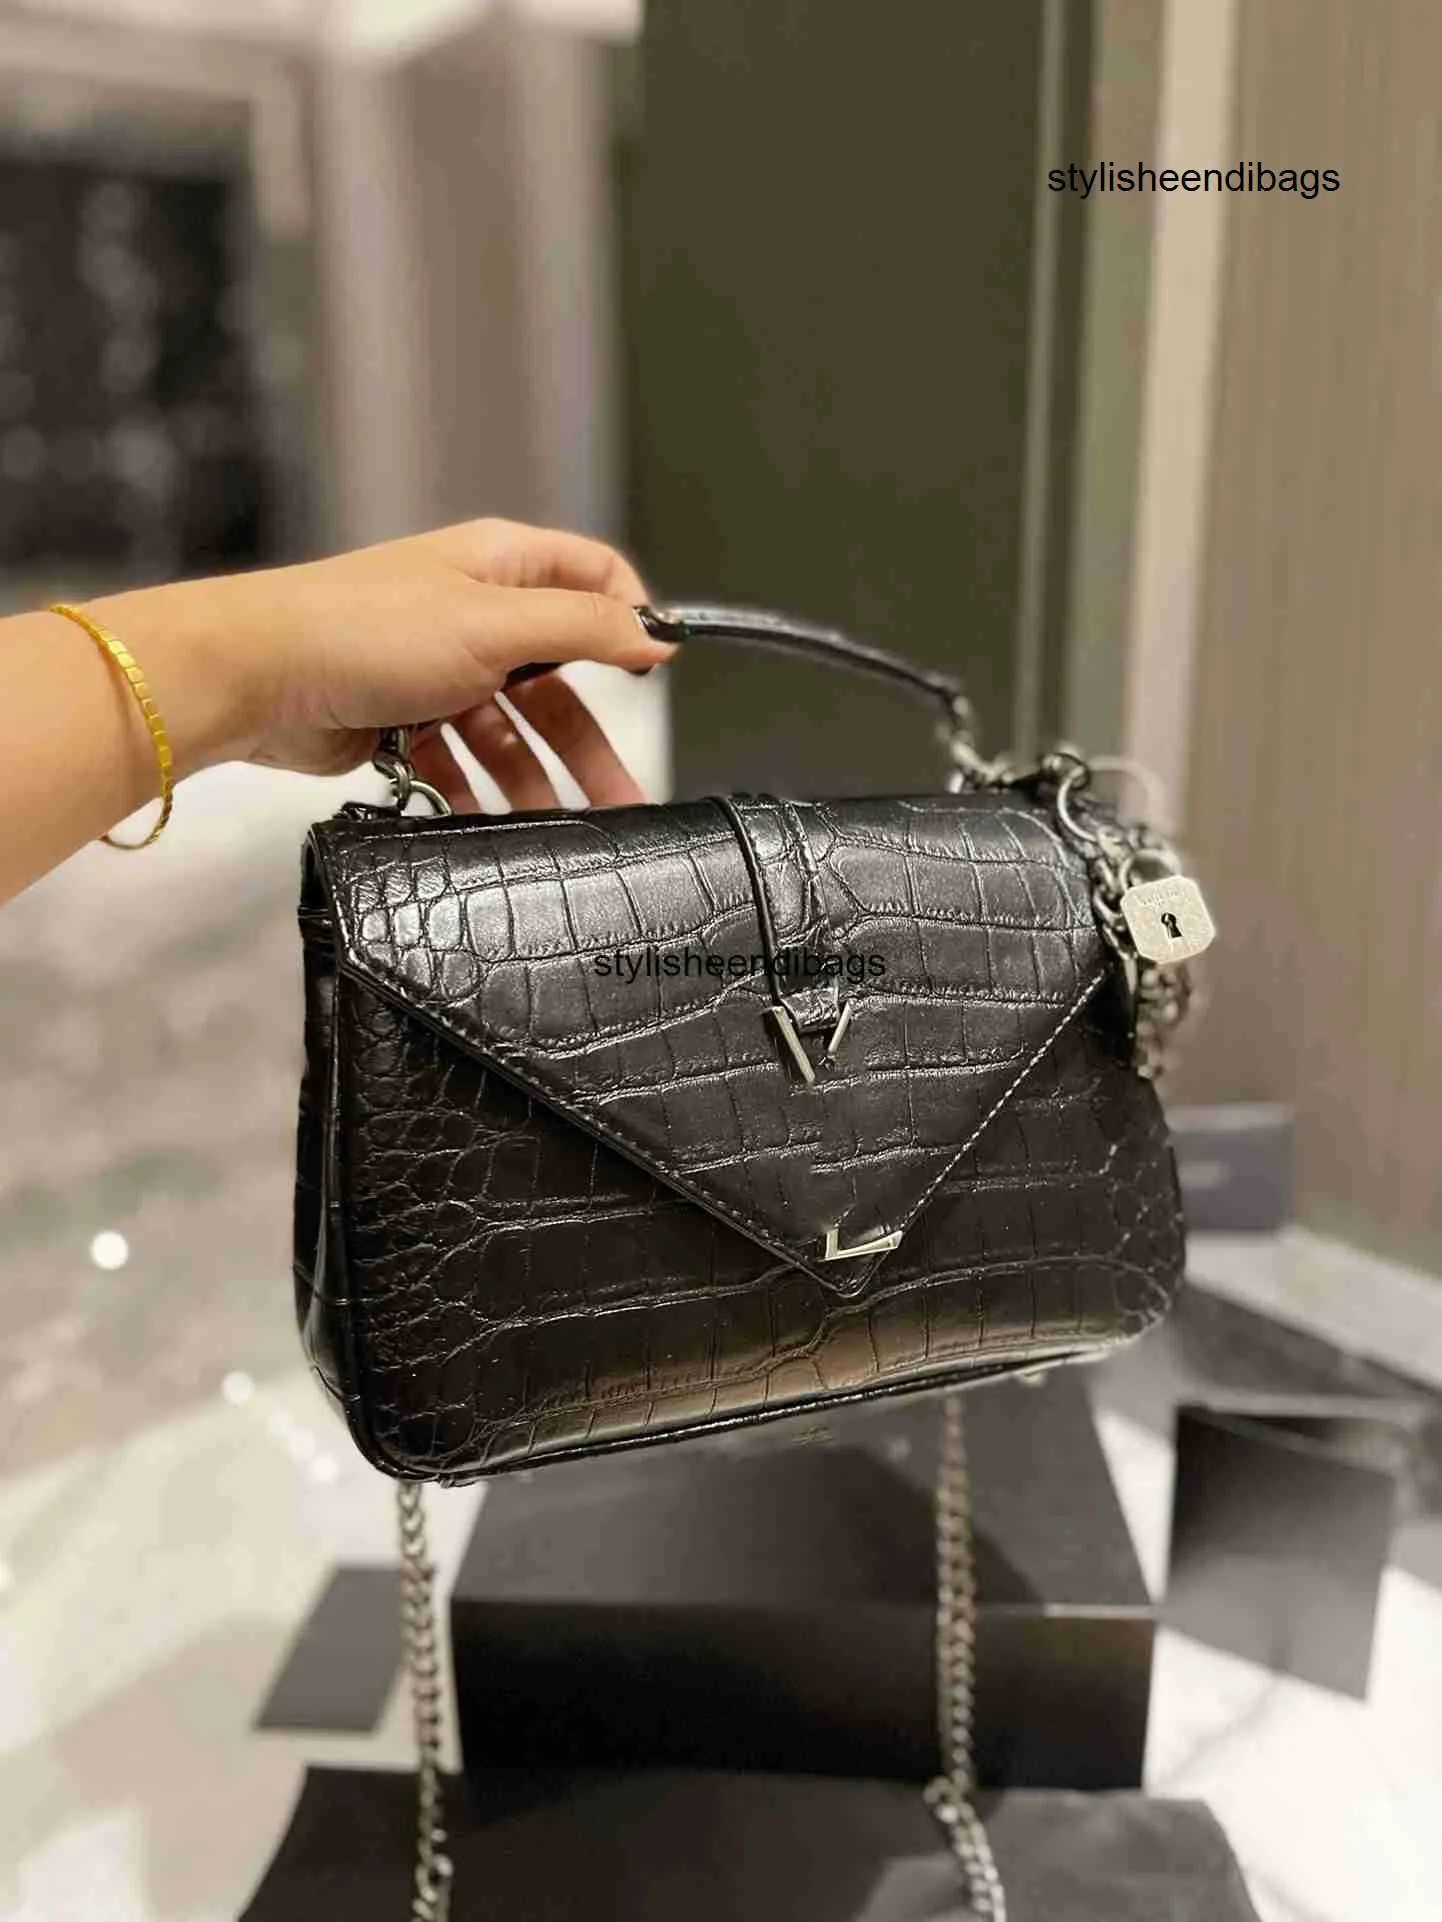 stylisheendibags Totes Luxury tote purses Brand handbag message bags Shoulder bag Genuine Leather Cluth Crossbody 5A Quality 24CM Cattlehide Silver Chain Flap Bag